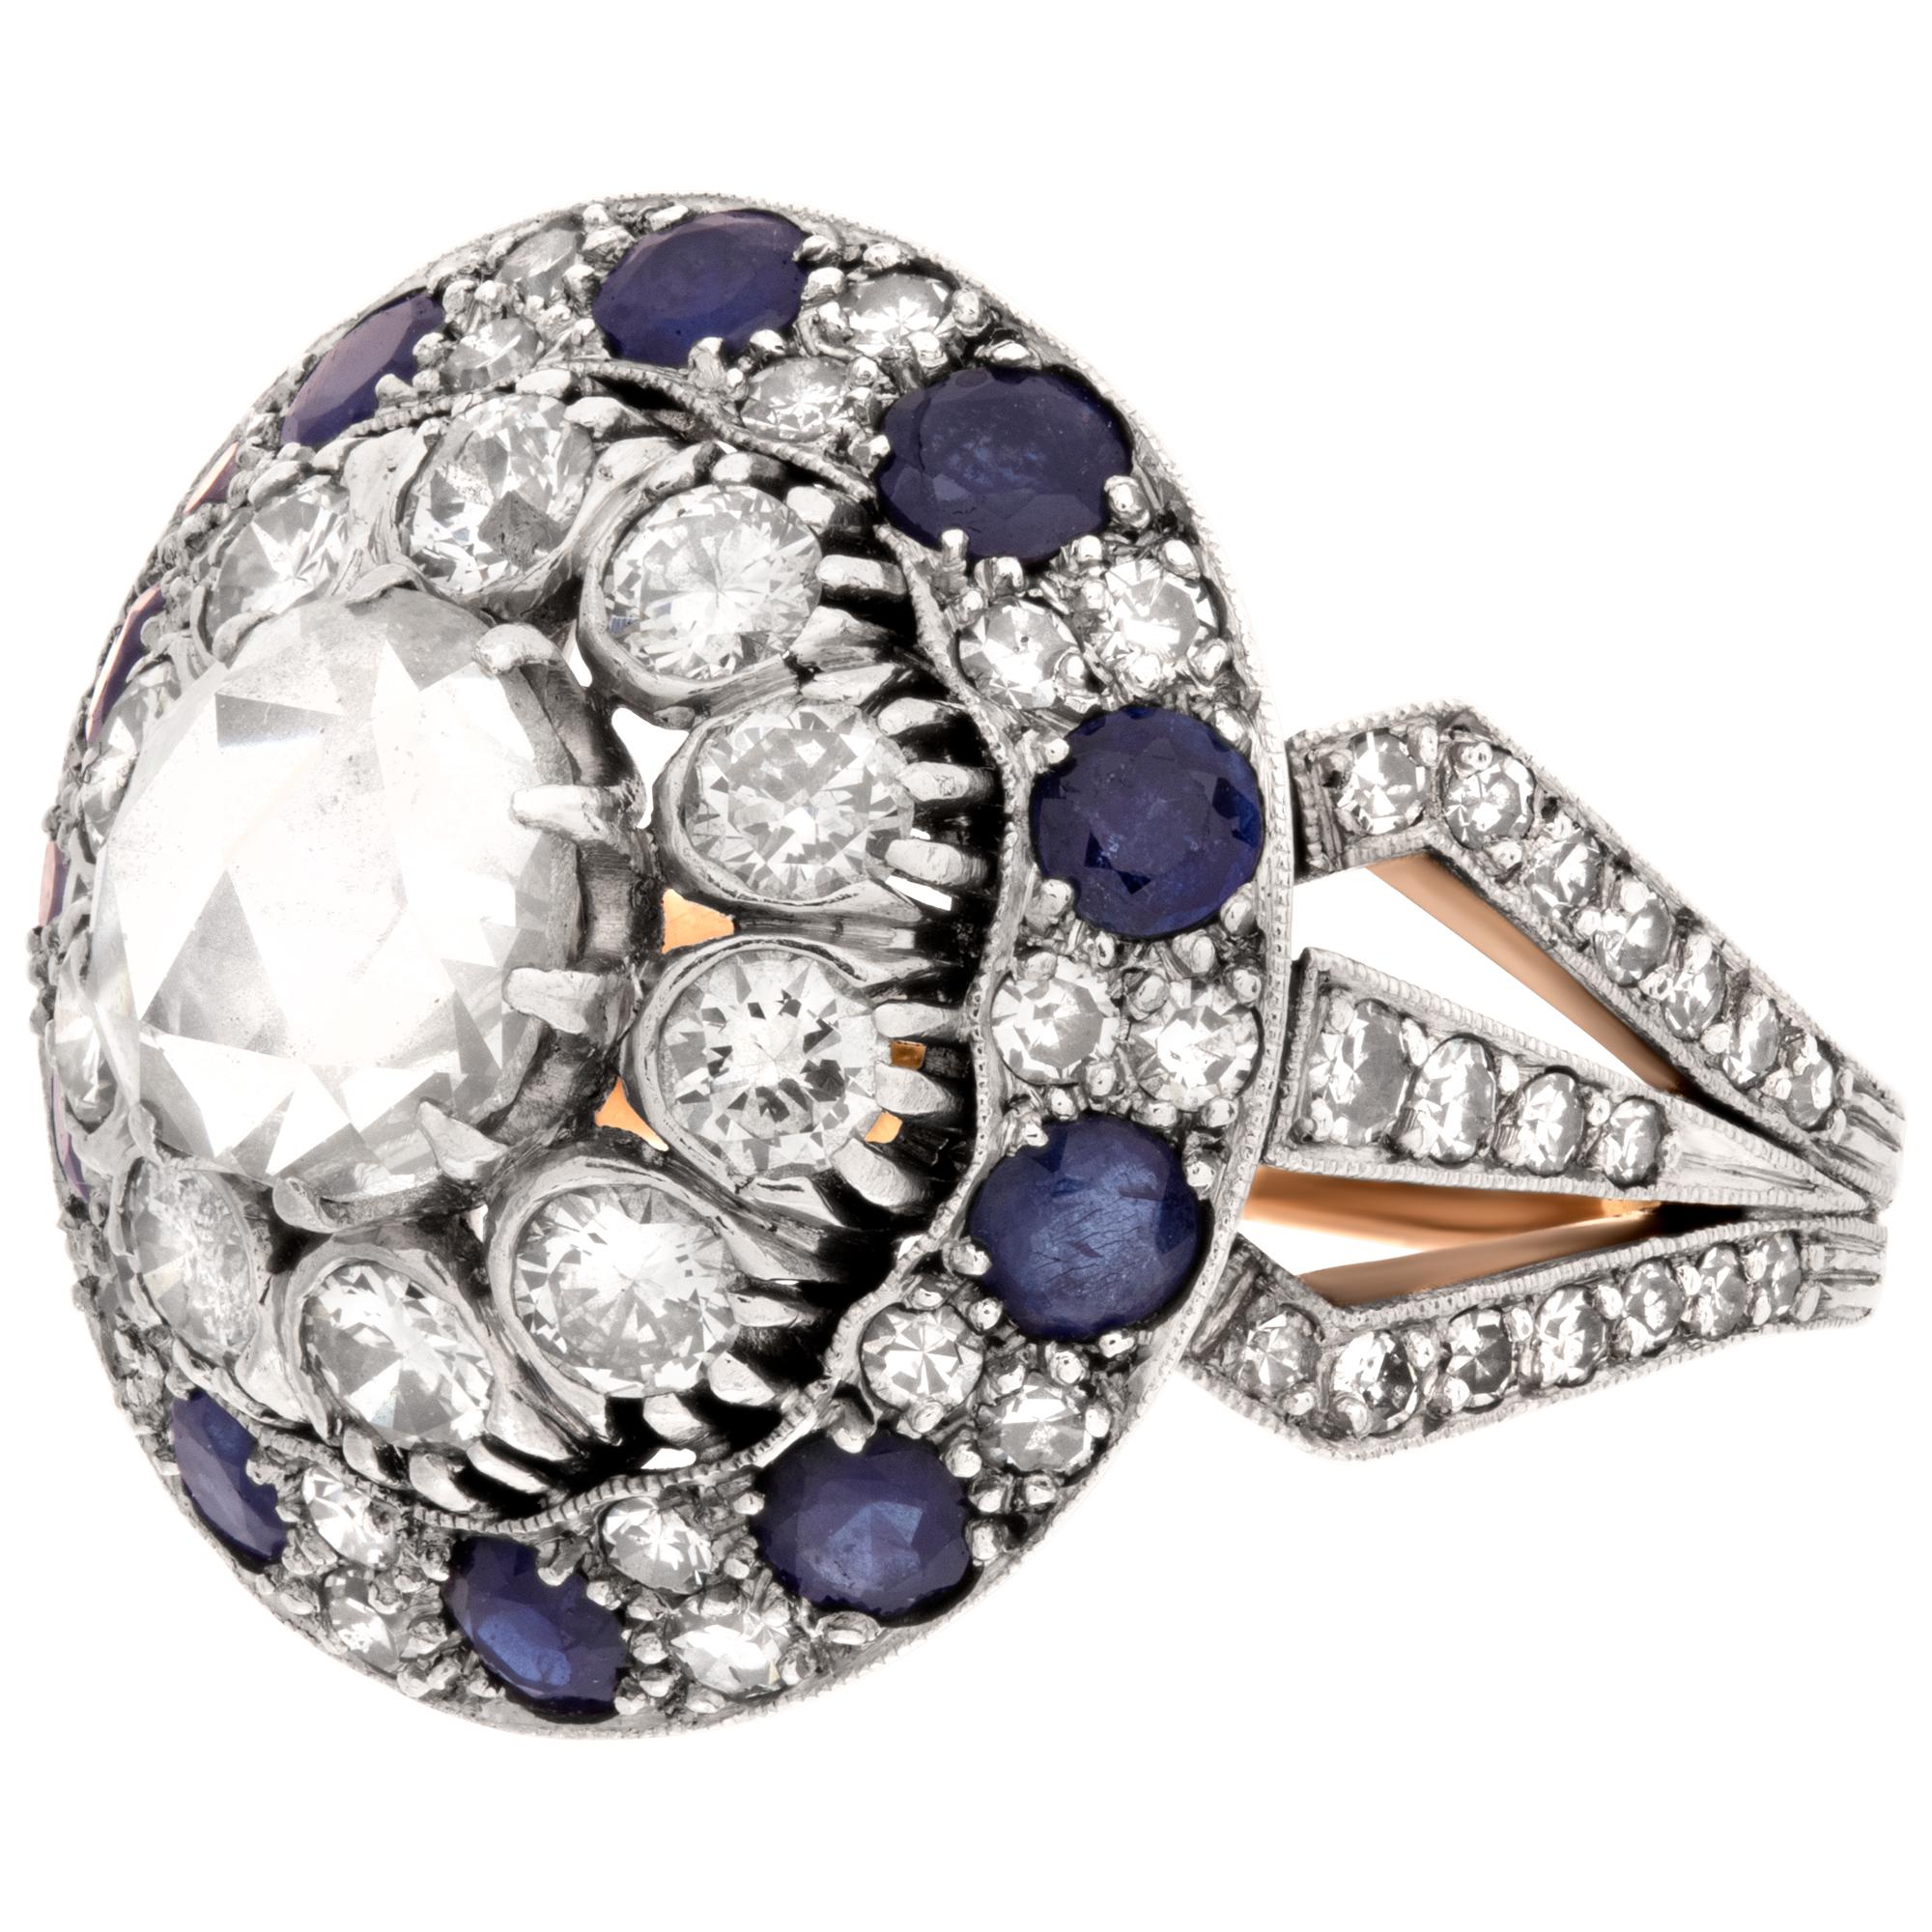 Women's Rose Cut Diamonds and Sapphire Ring in 18k White and Rose Gold